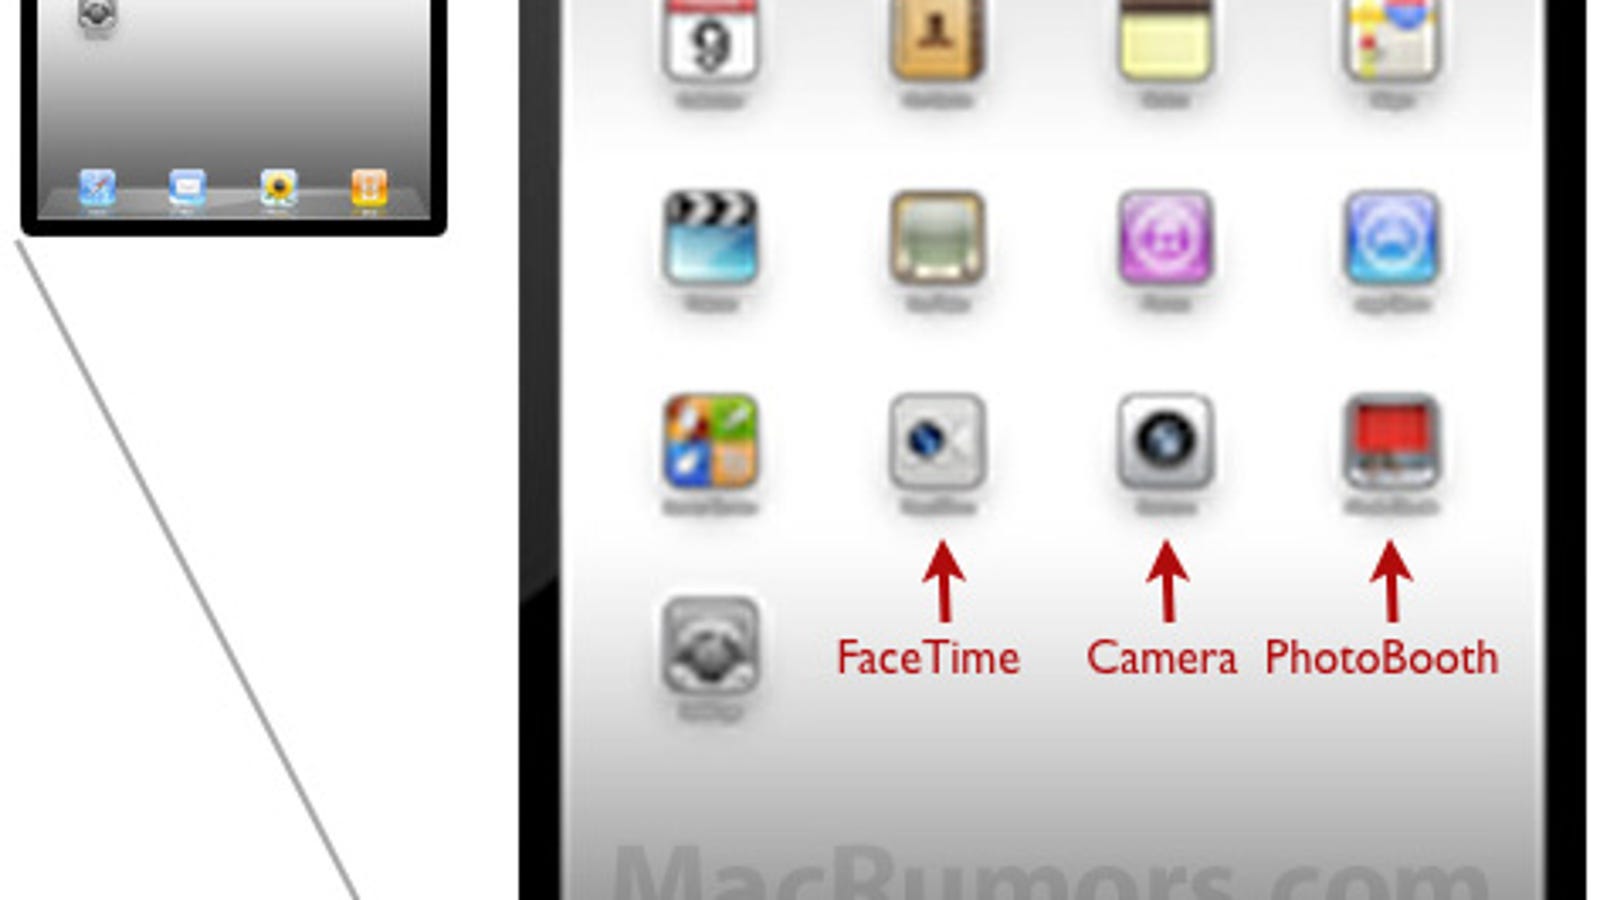 The Next iPad Will Likely Have Camera, FaceTime, and ...